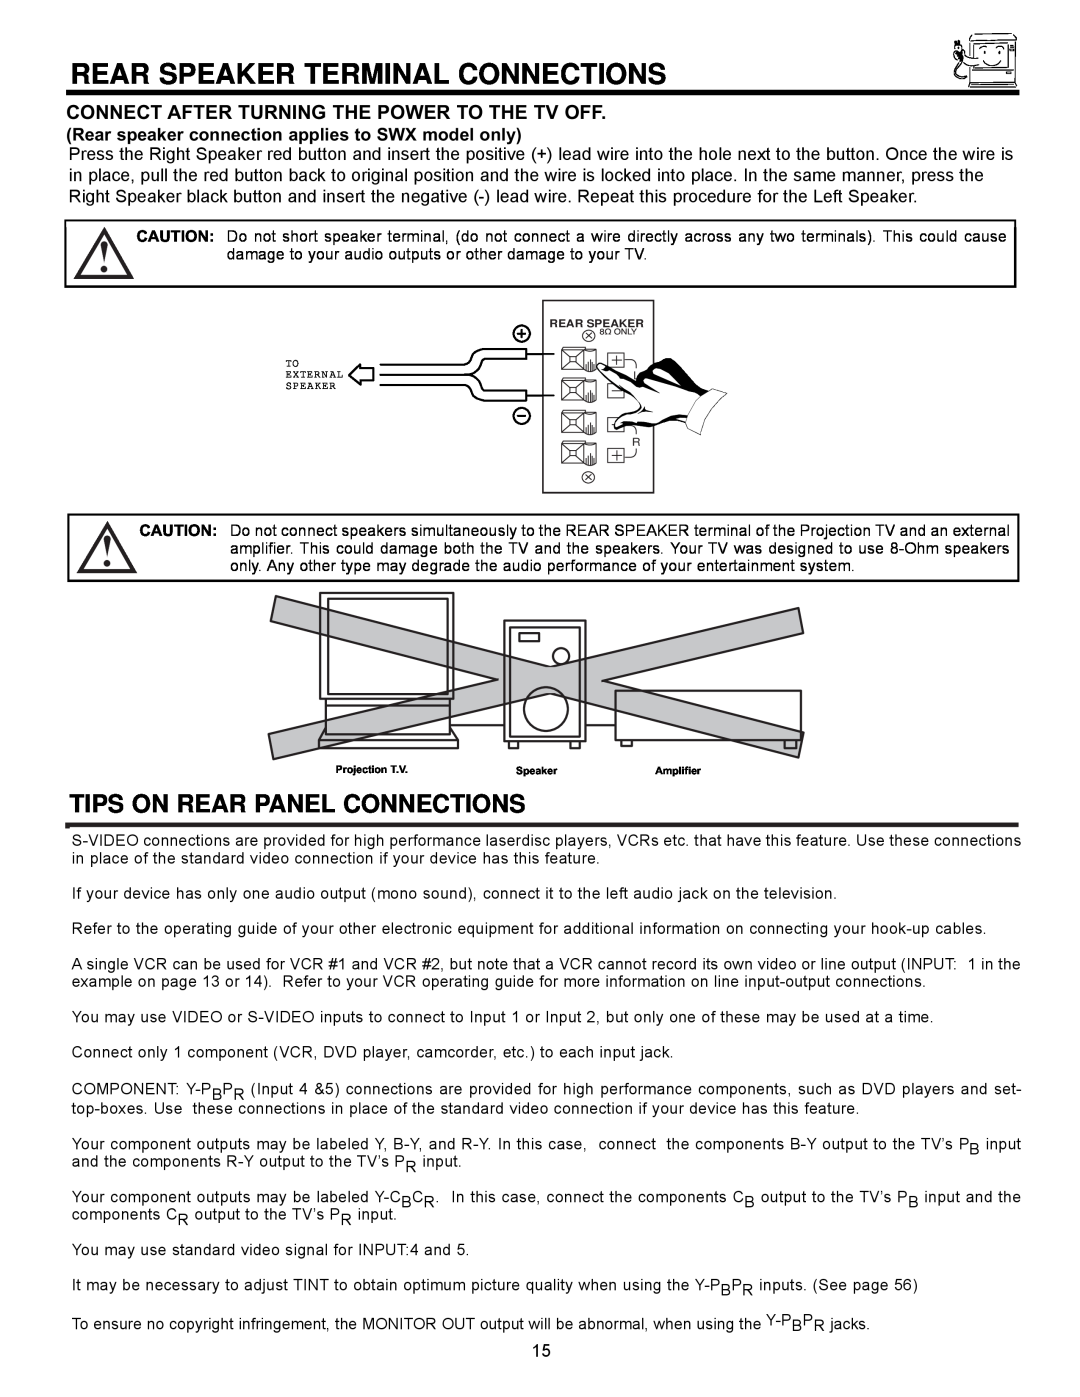 Hitachi 61UWX10B important safety instructions Rear Speaker Terminal Connections, Tips On Rear Panel Connections 